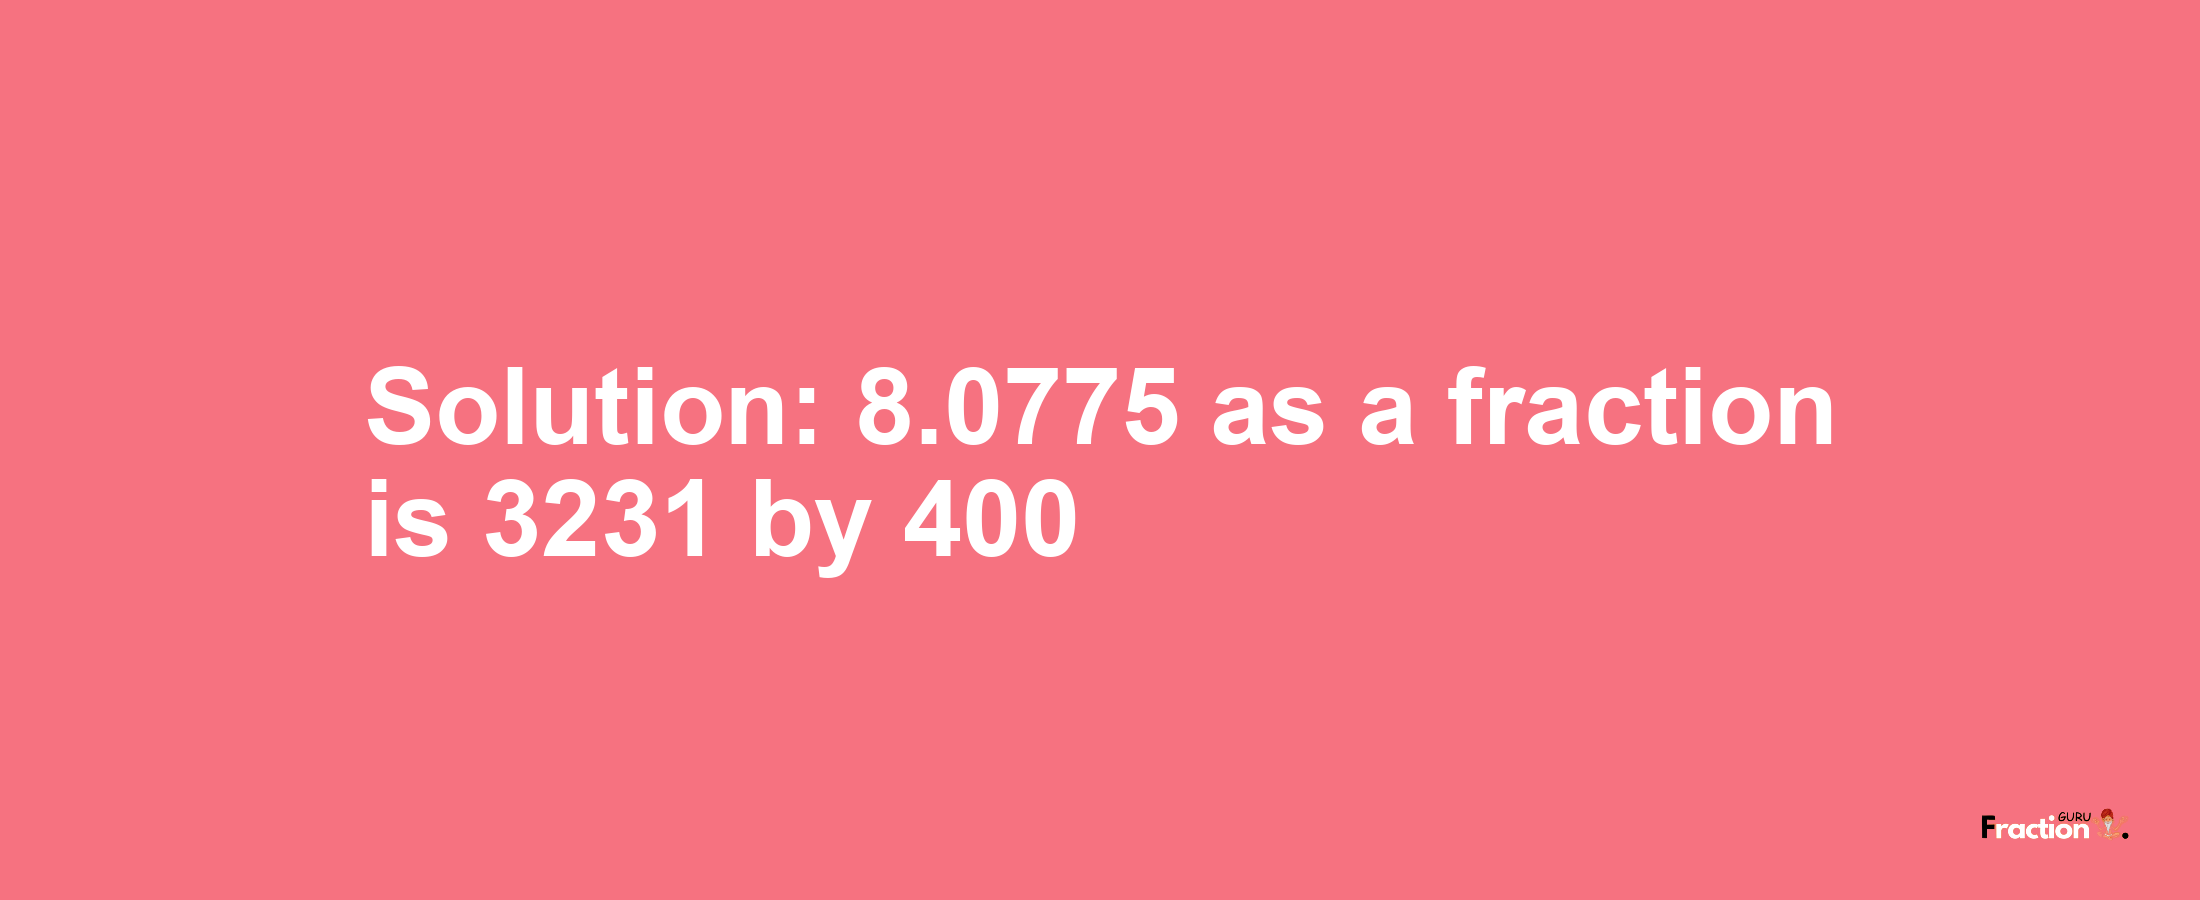 Solution:8.0775 as a fraction is 3231/400